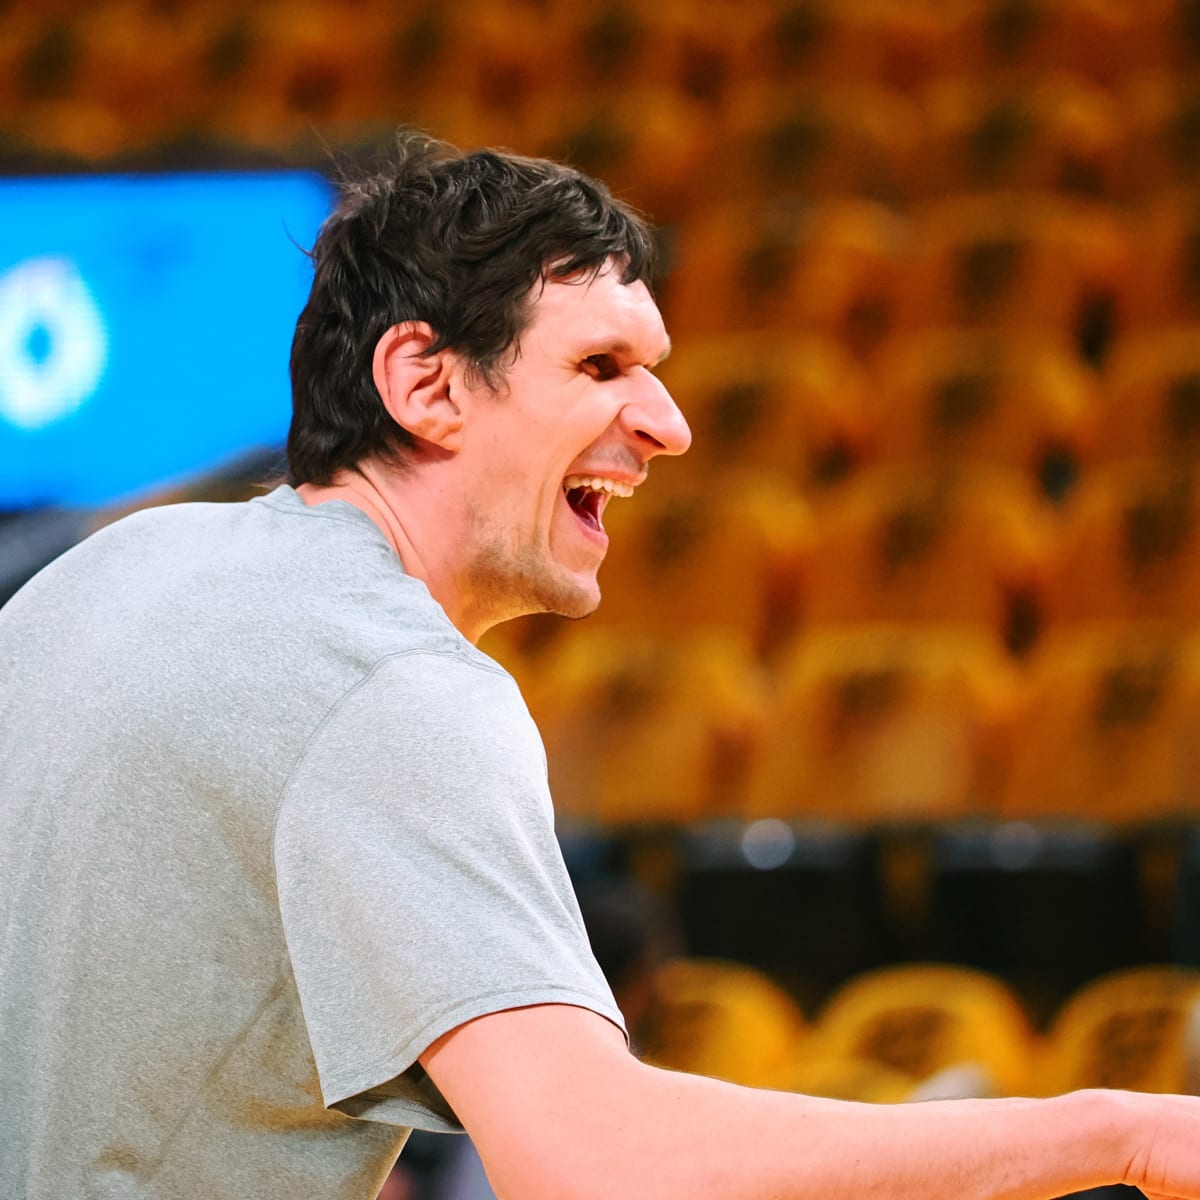 Agents: Boban Marjanovic agrees to one-year deal with Rockets - ESPN